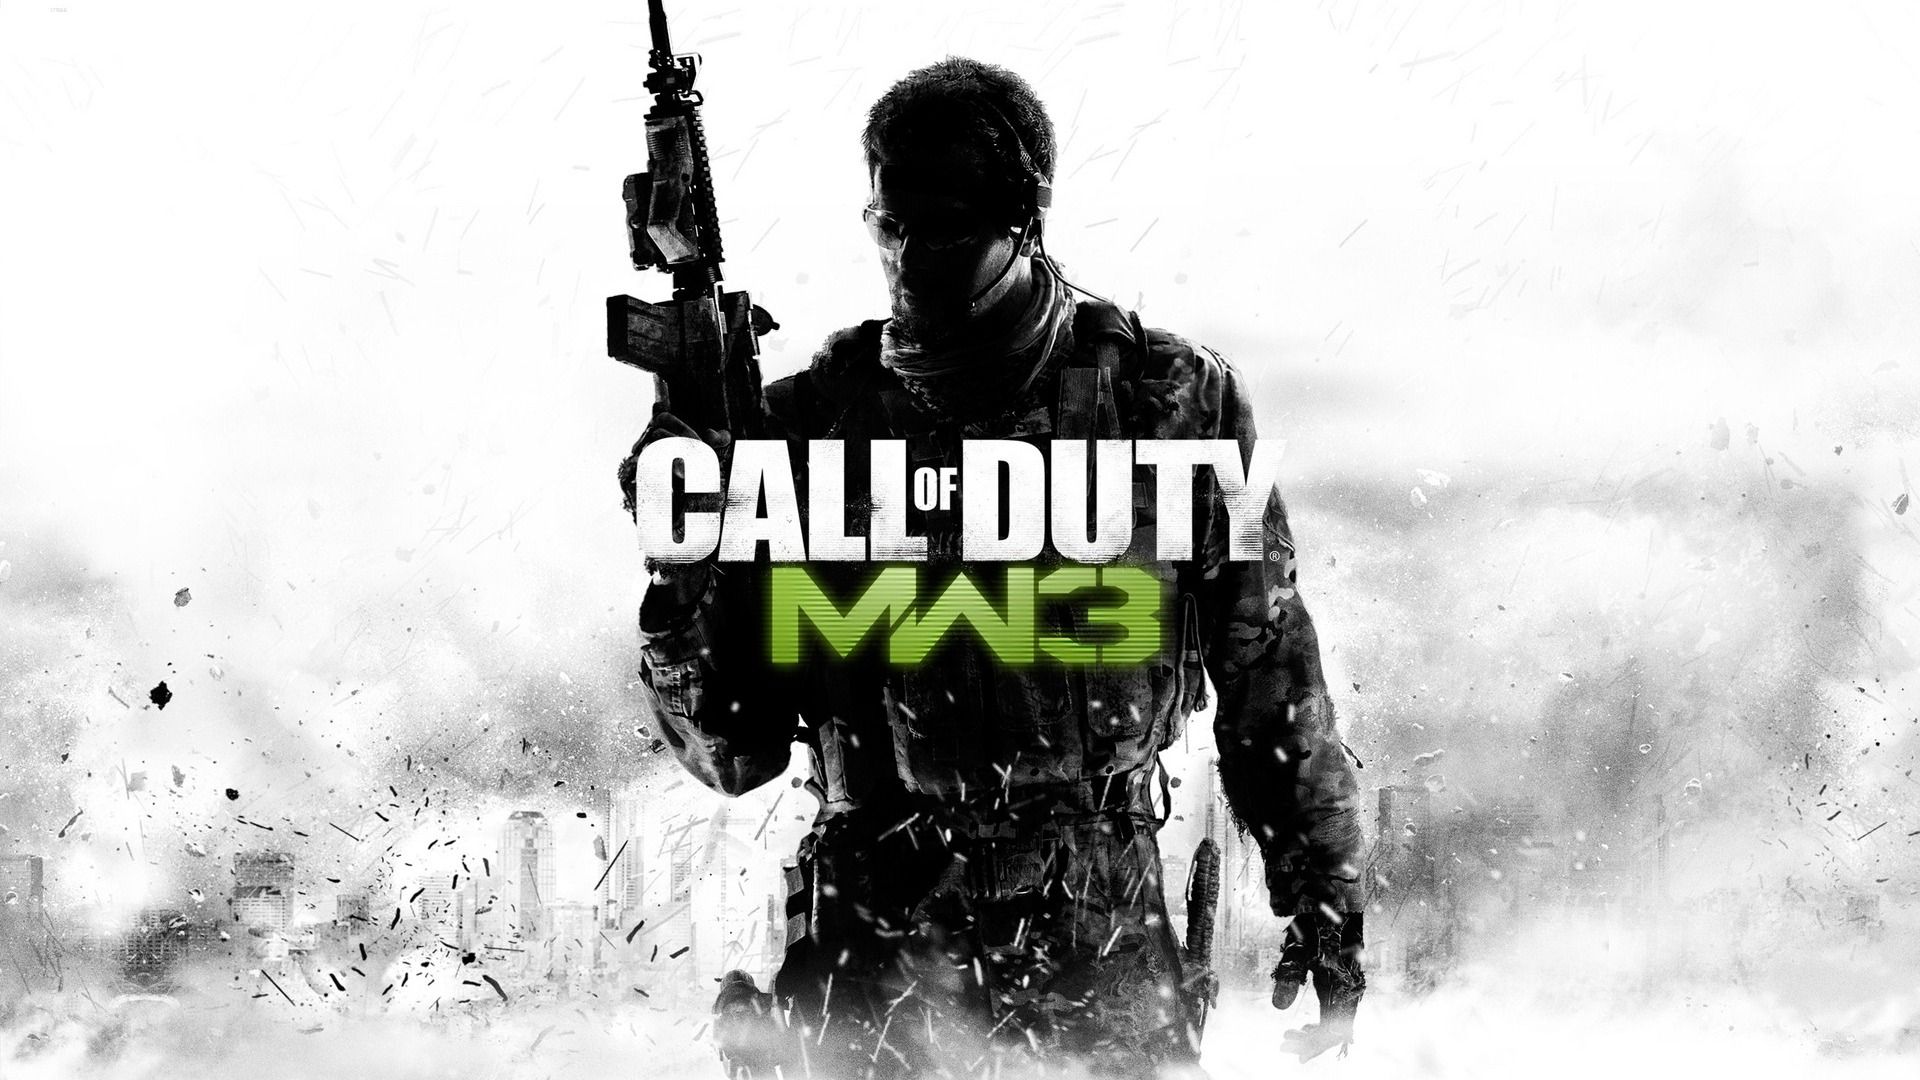 HD Quality War Game Call of Duty MW3 Wallpapers 3 Full Size ...